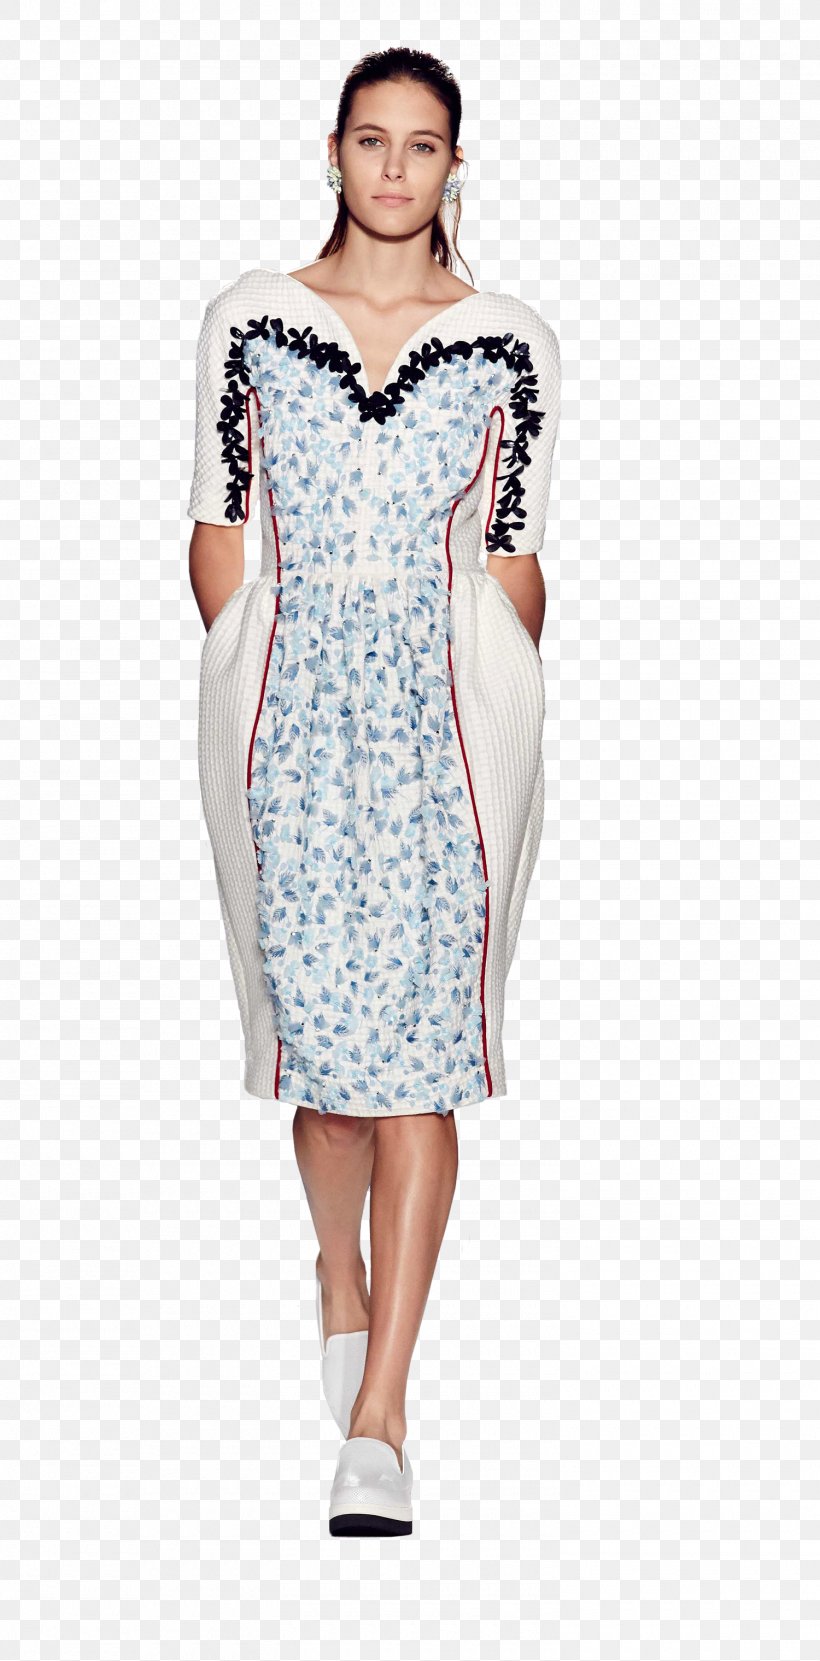 London Fashion Week Ready-to-wear Mother Of Pearl Model, PNG, 1500x3039px, Fashion, Catwalk, Clothing, Cocktail Dress, Costume Download Free